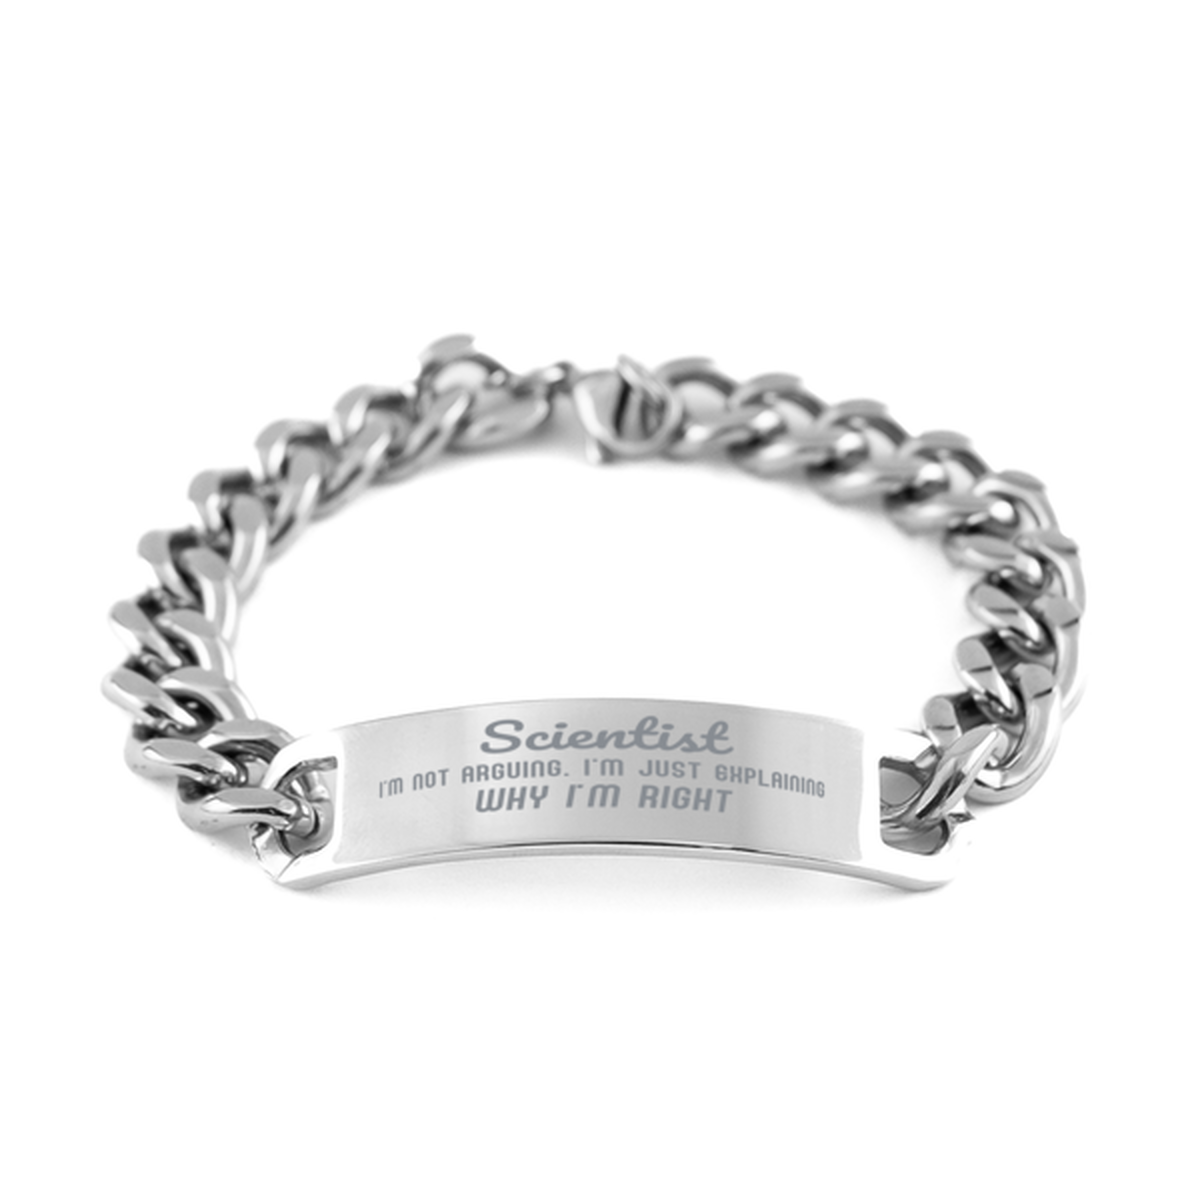 Scientist I'm not Arguing. I'm Just Explaining Why I'm RIGHT Cuban Chain Stainless Steel Bracelet, Graduation Birthday Christmas Scientist Gifts For Scientist Funny Saying Quote Present for Men Women Coworker